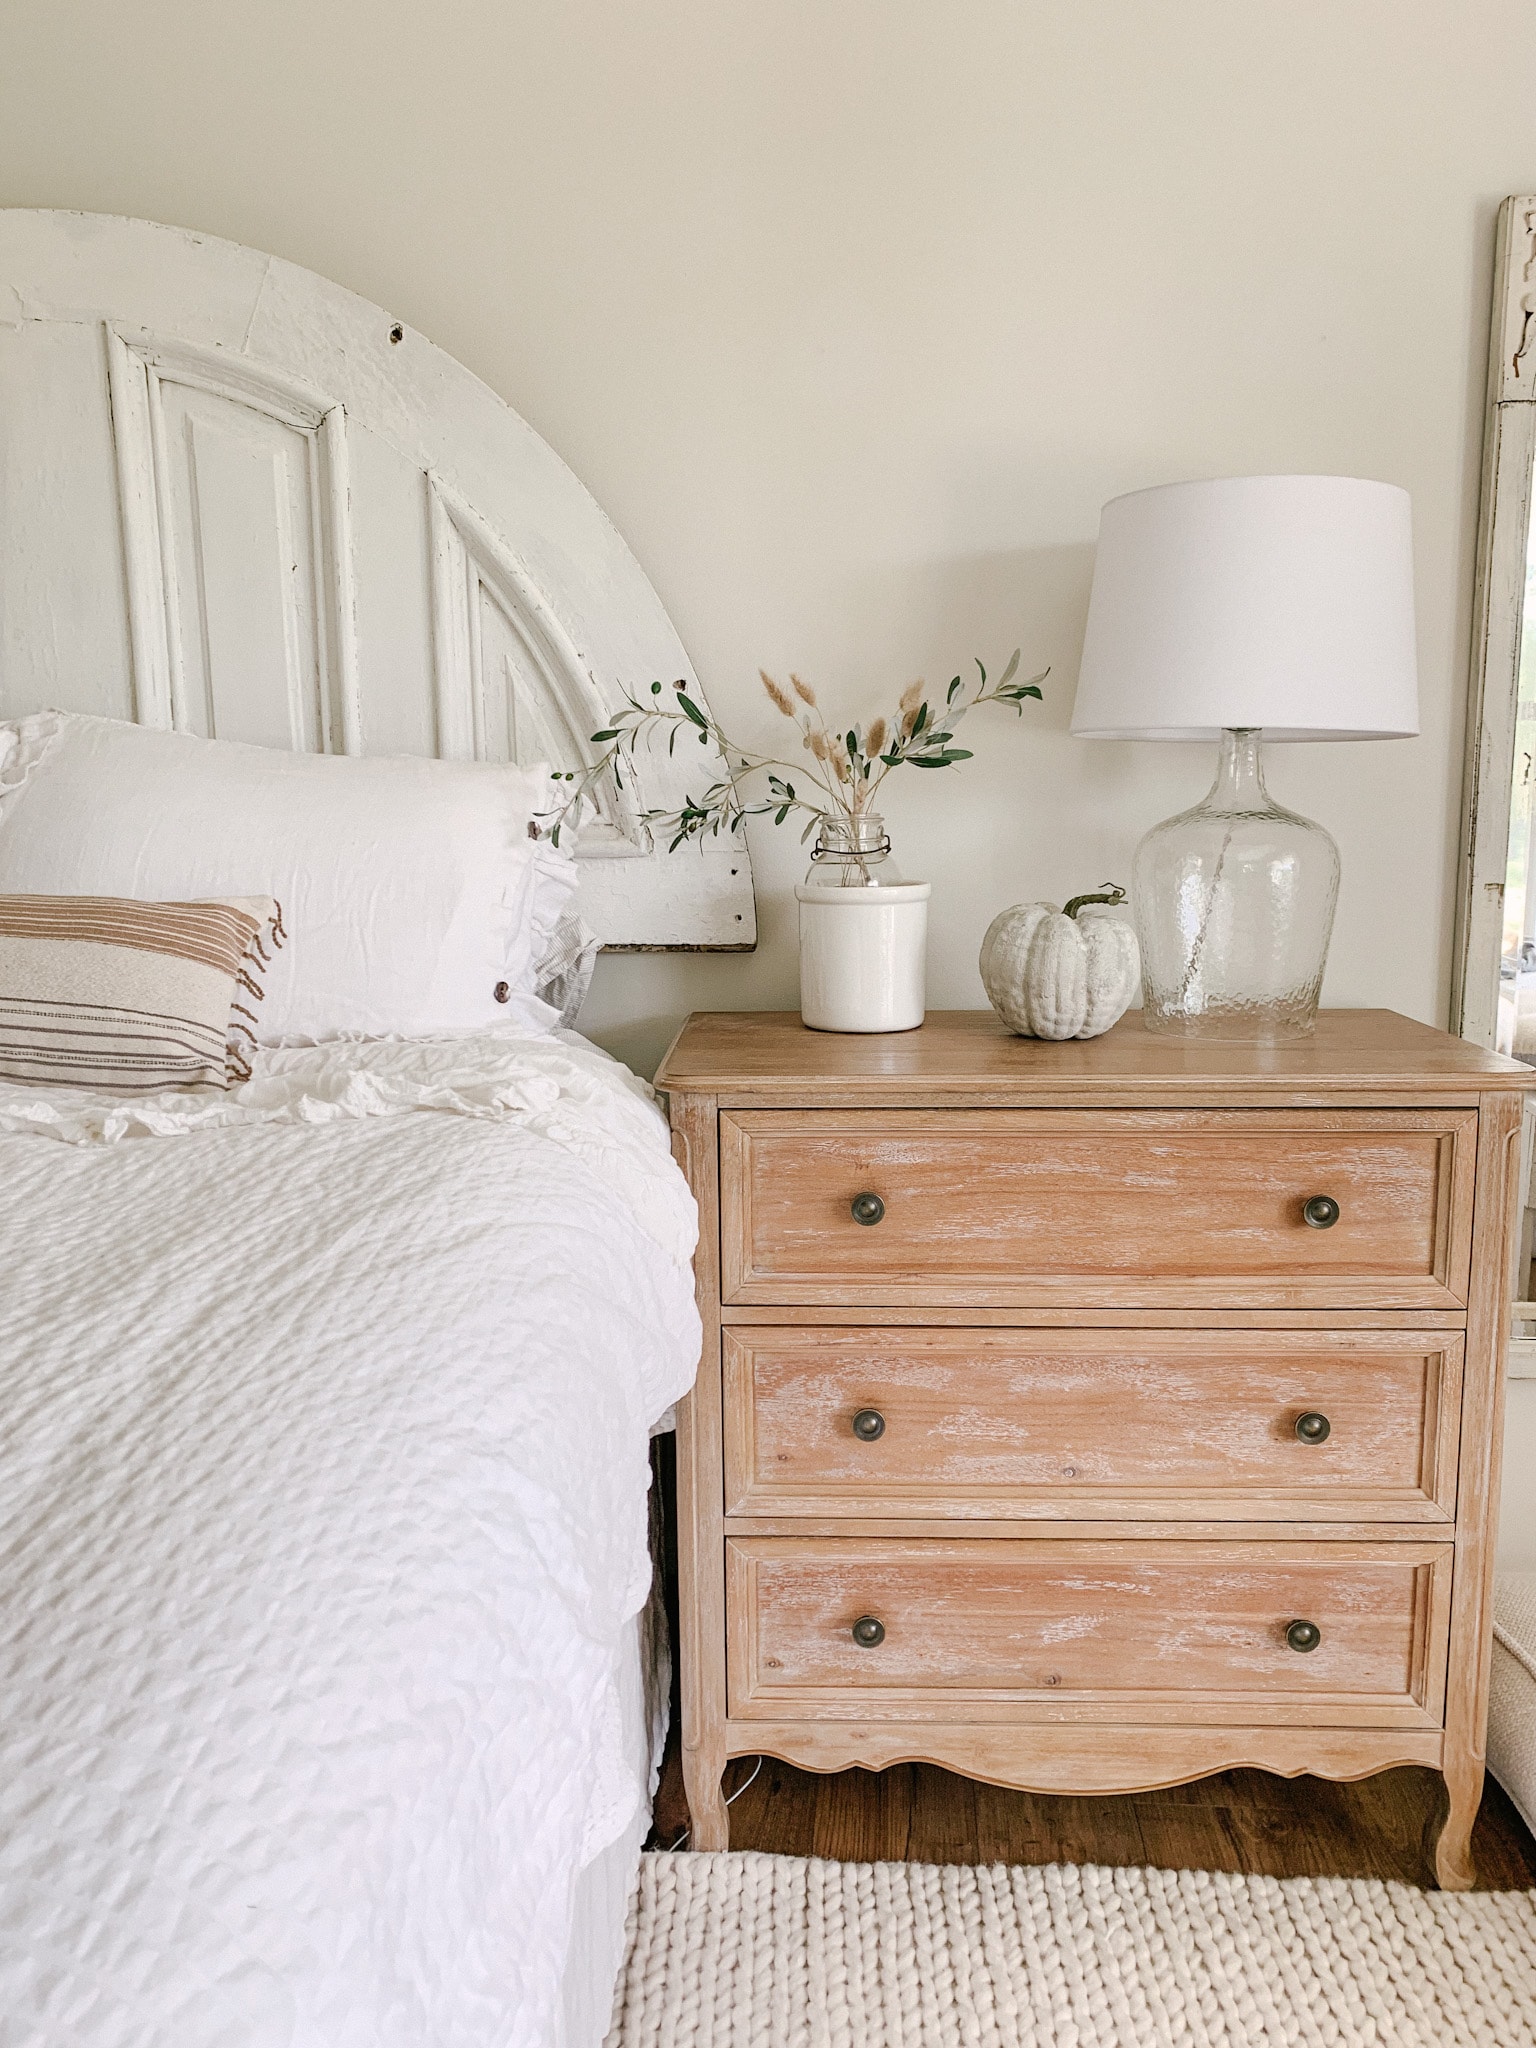 transitioning your home from summer to fall subtly